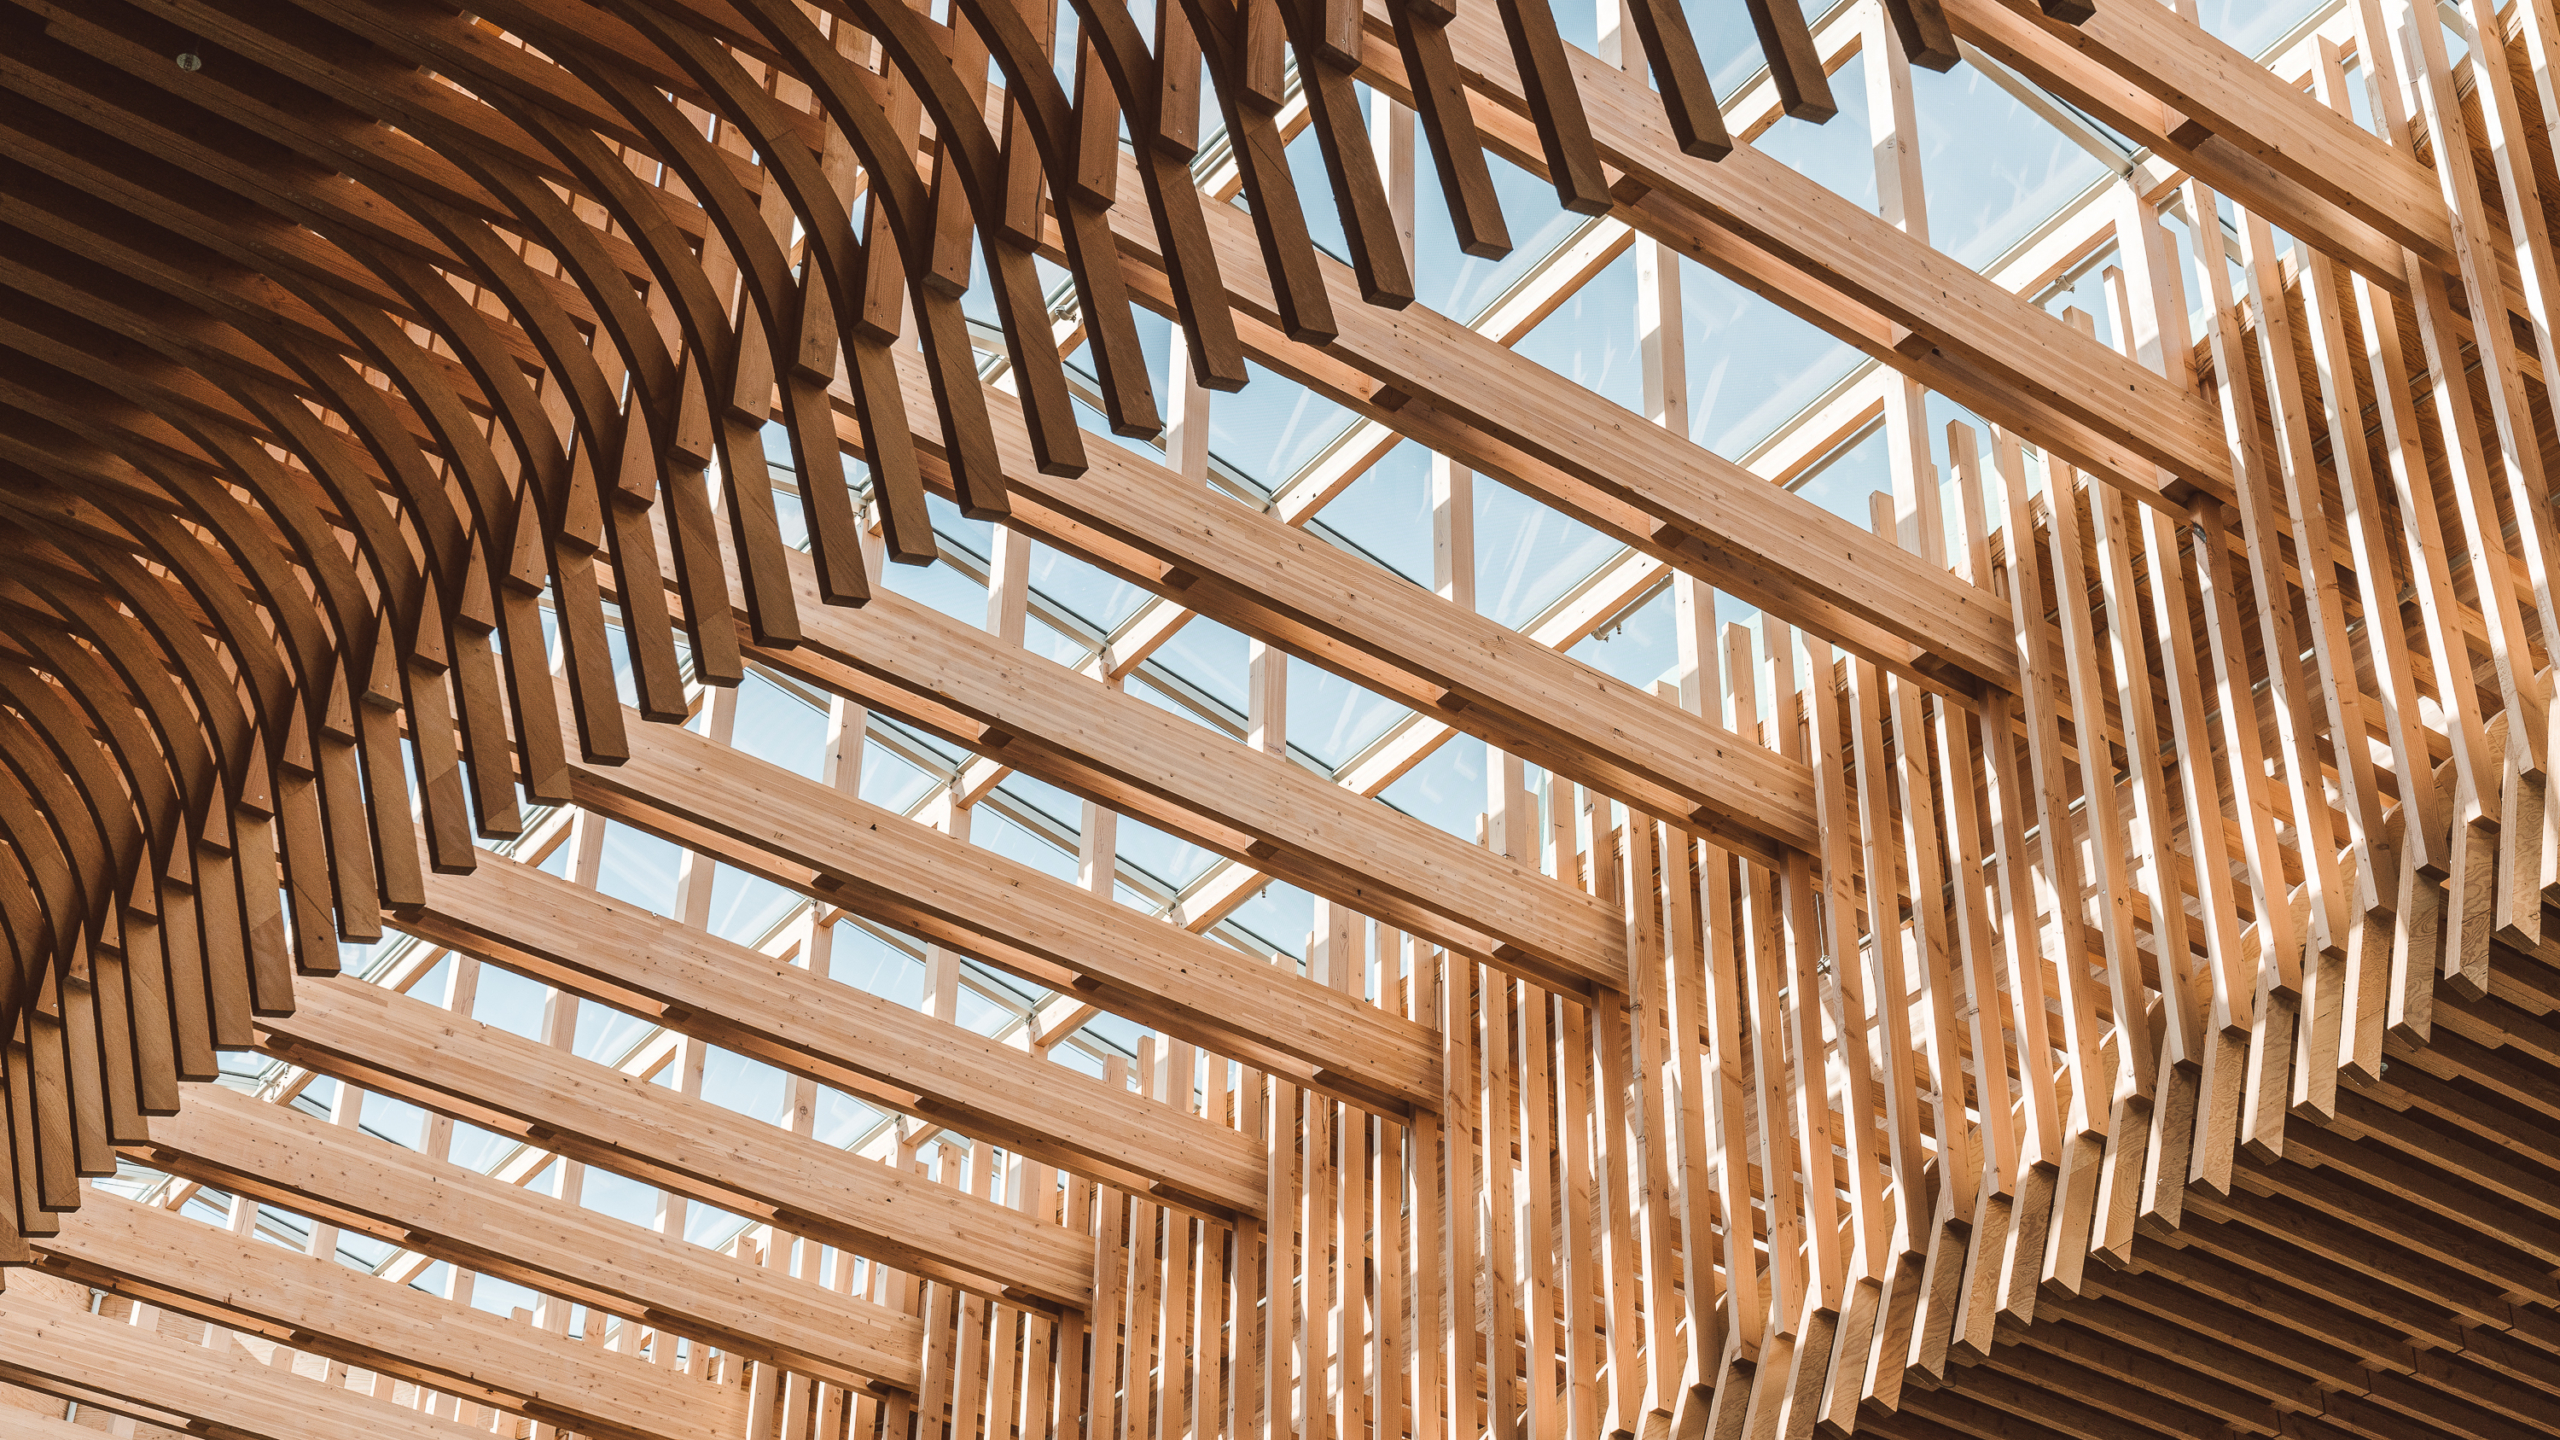 A beautiful display of mass timber at the new PDX Airport designed by ZGF Architects.